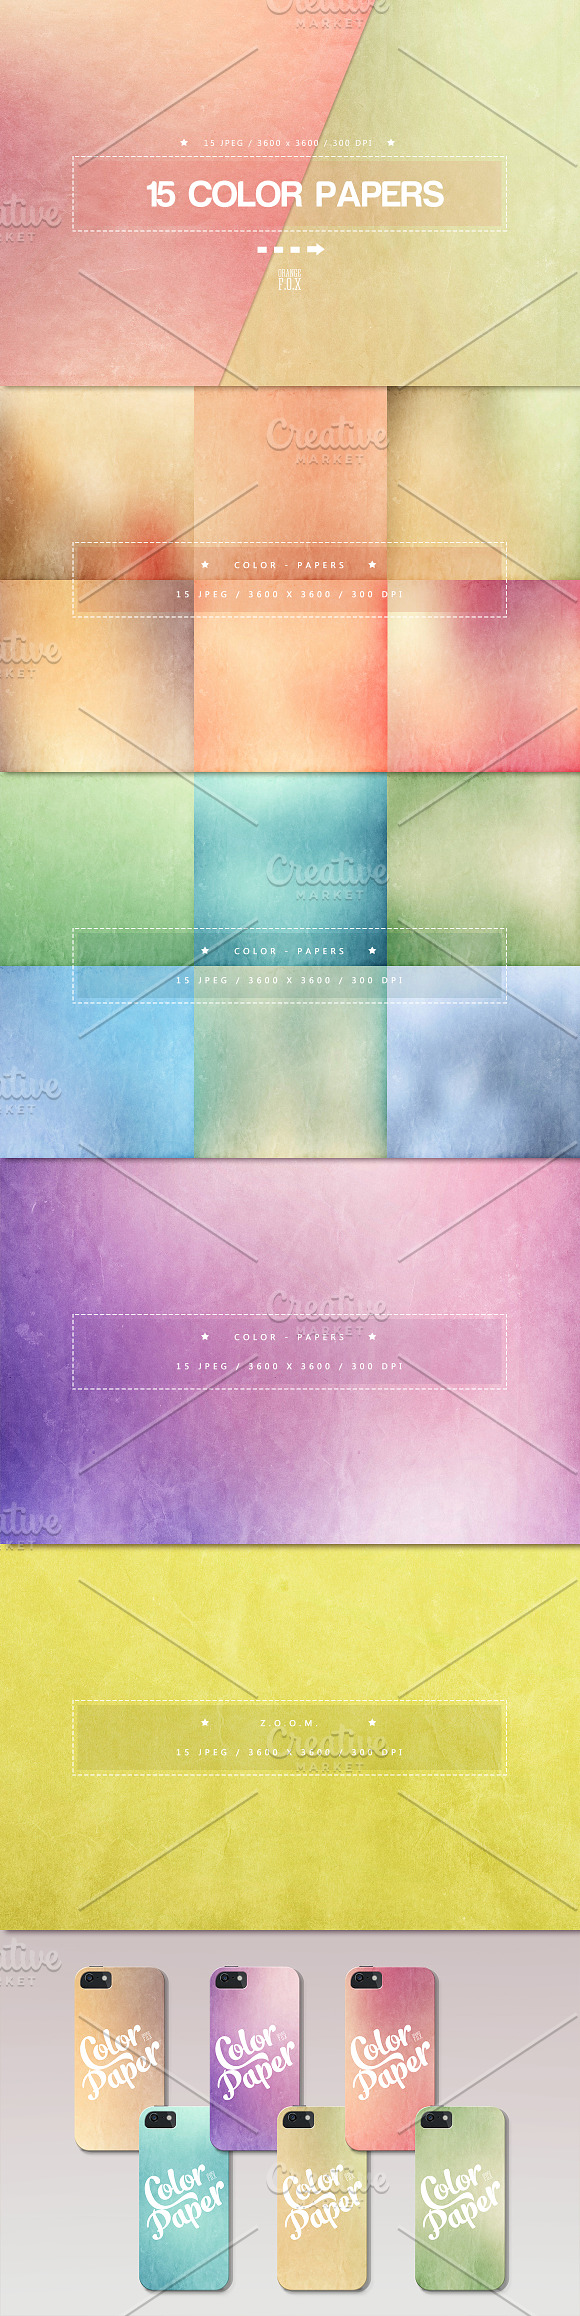 15 Color Papers in Textures - product preview 6